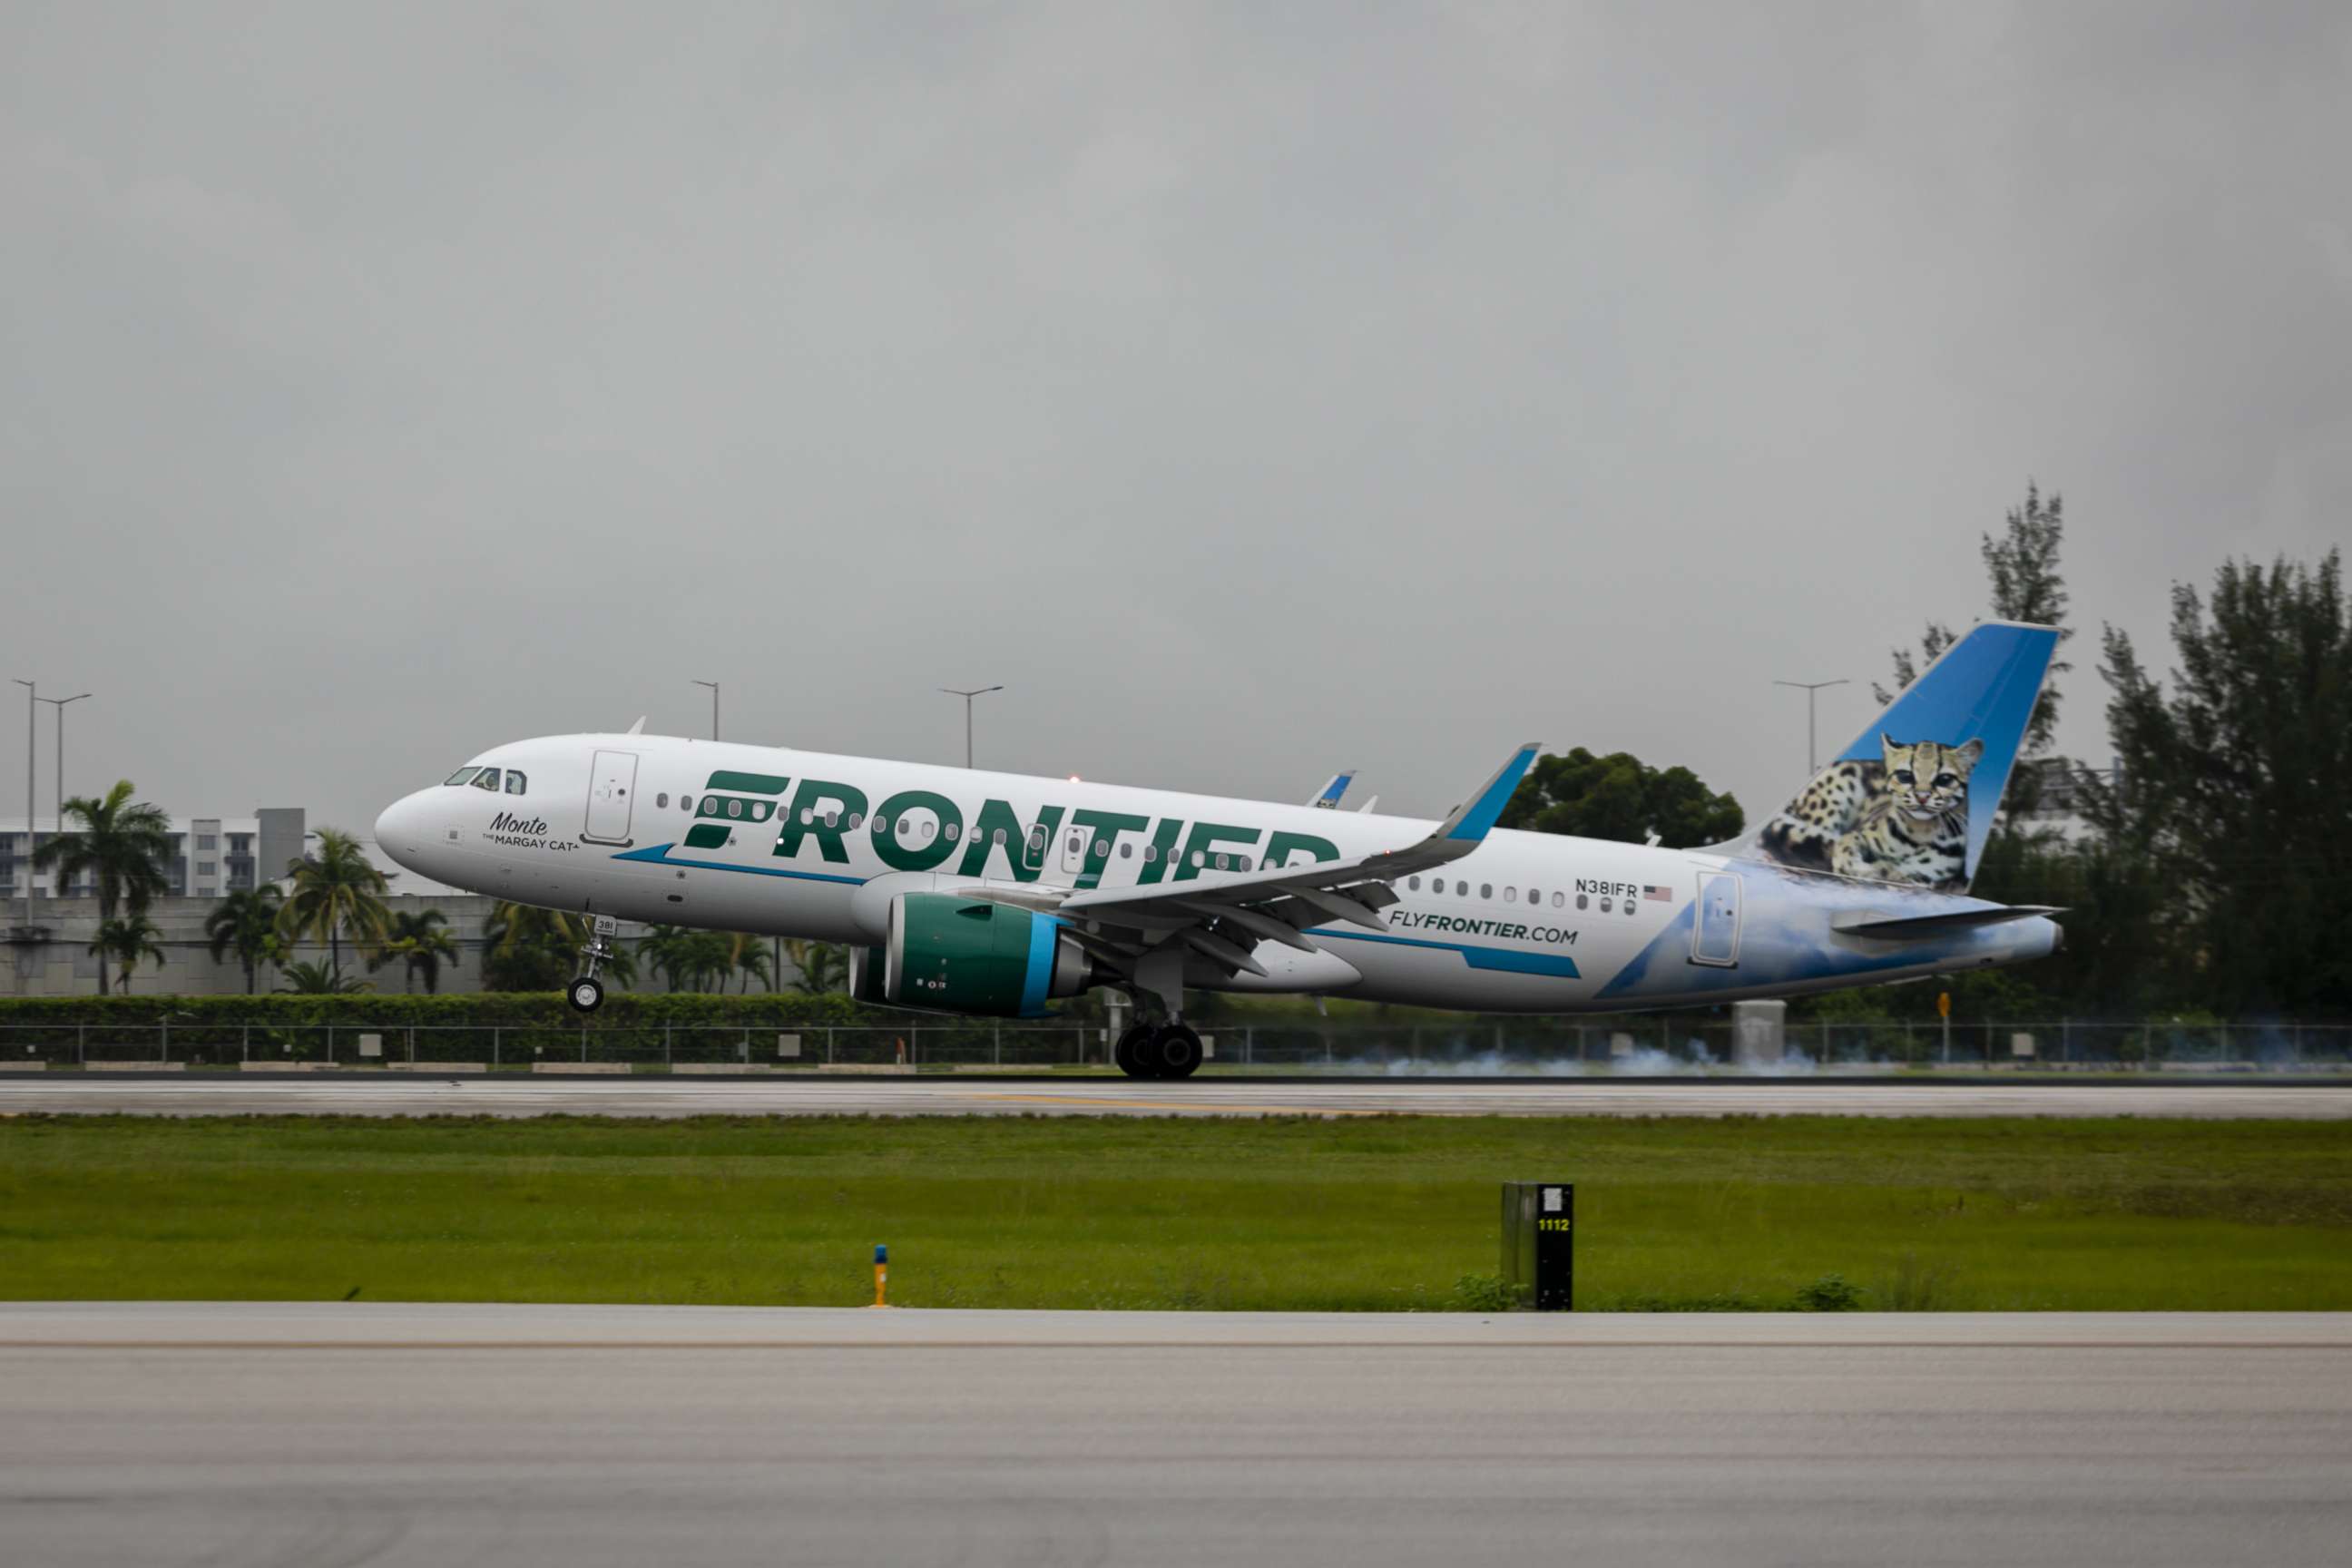 PHOTO: A passenger aircraft operated by Frontier Airlines Inc. lands at Miami International Airport in Miami, Florida, June 16, 2021.